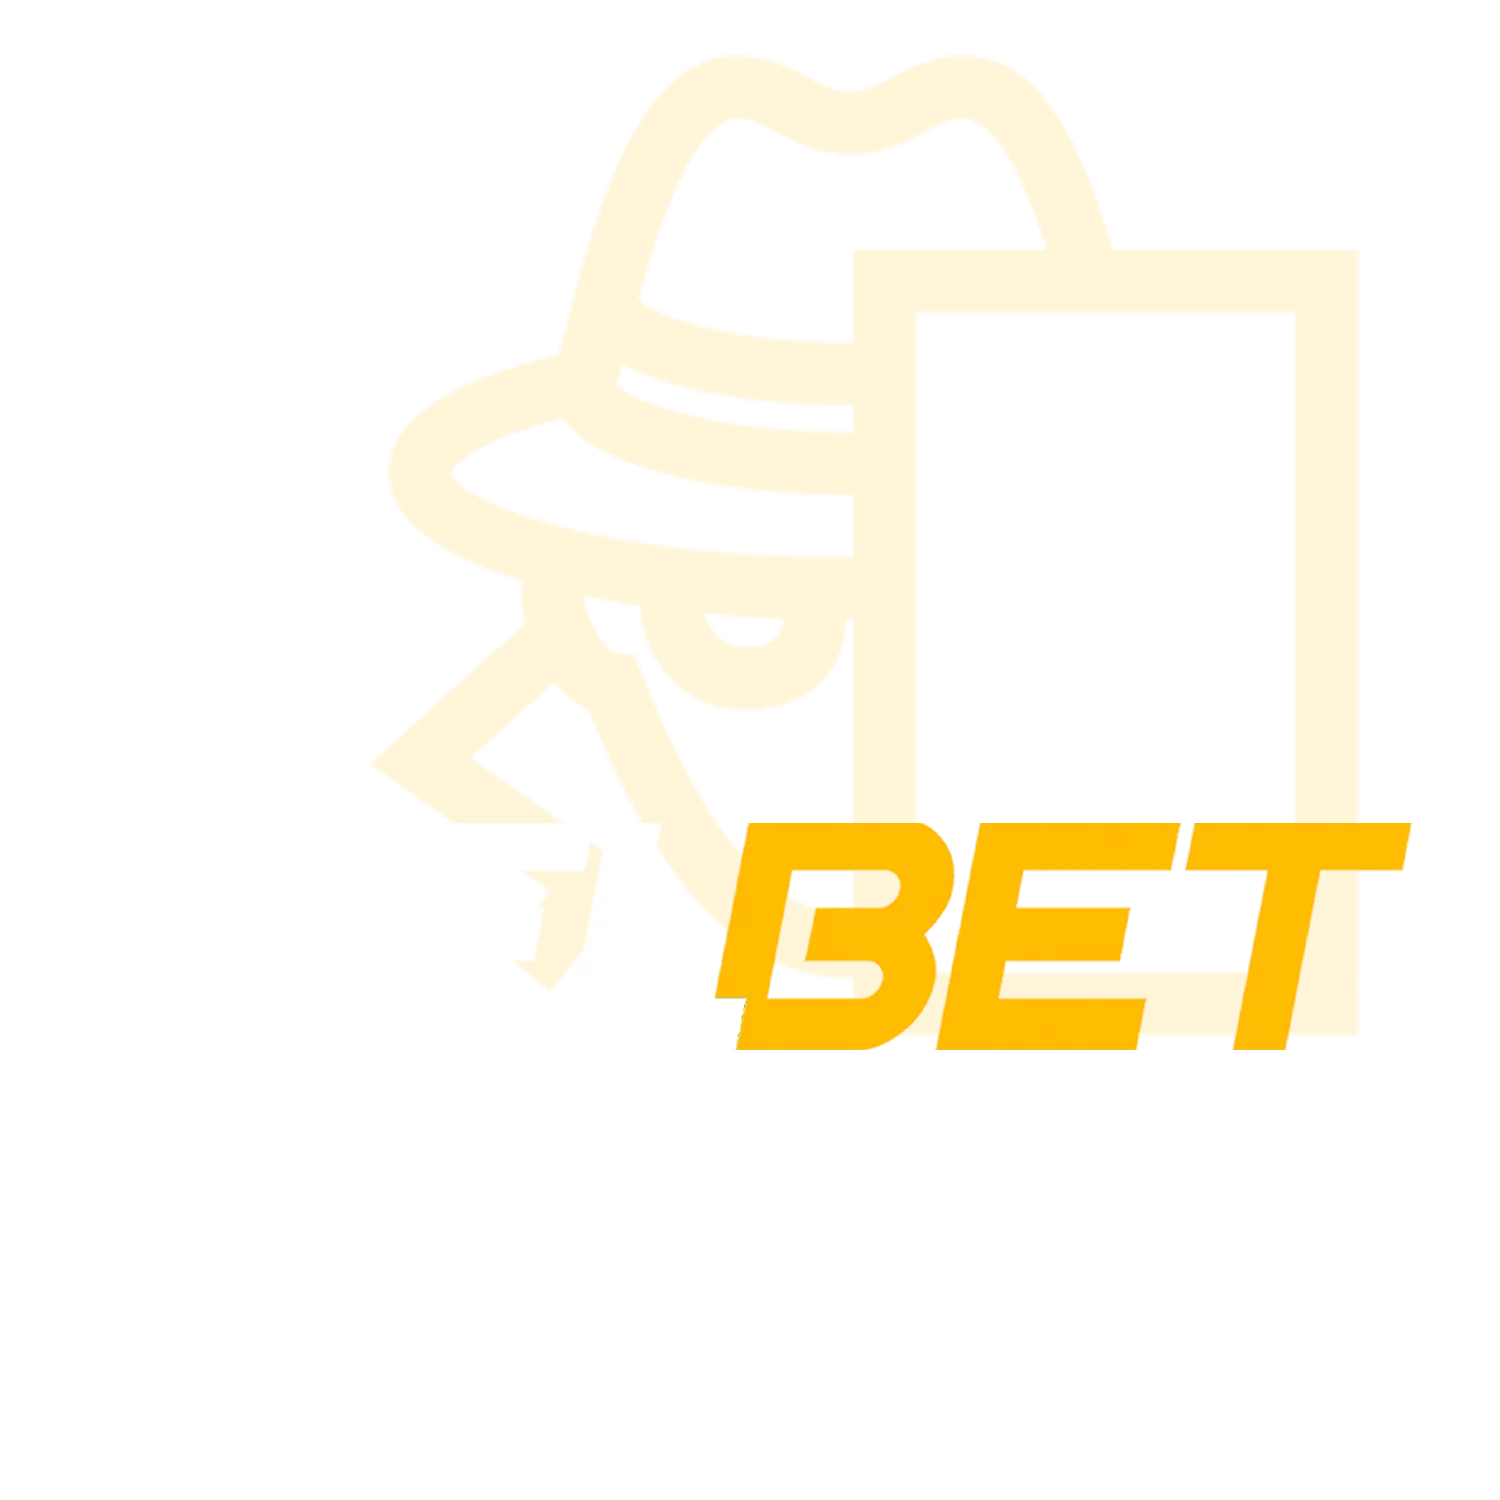 Read more about anti fraud policy at Melbet.